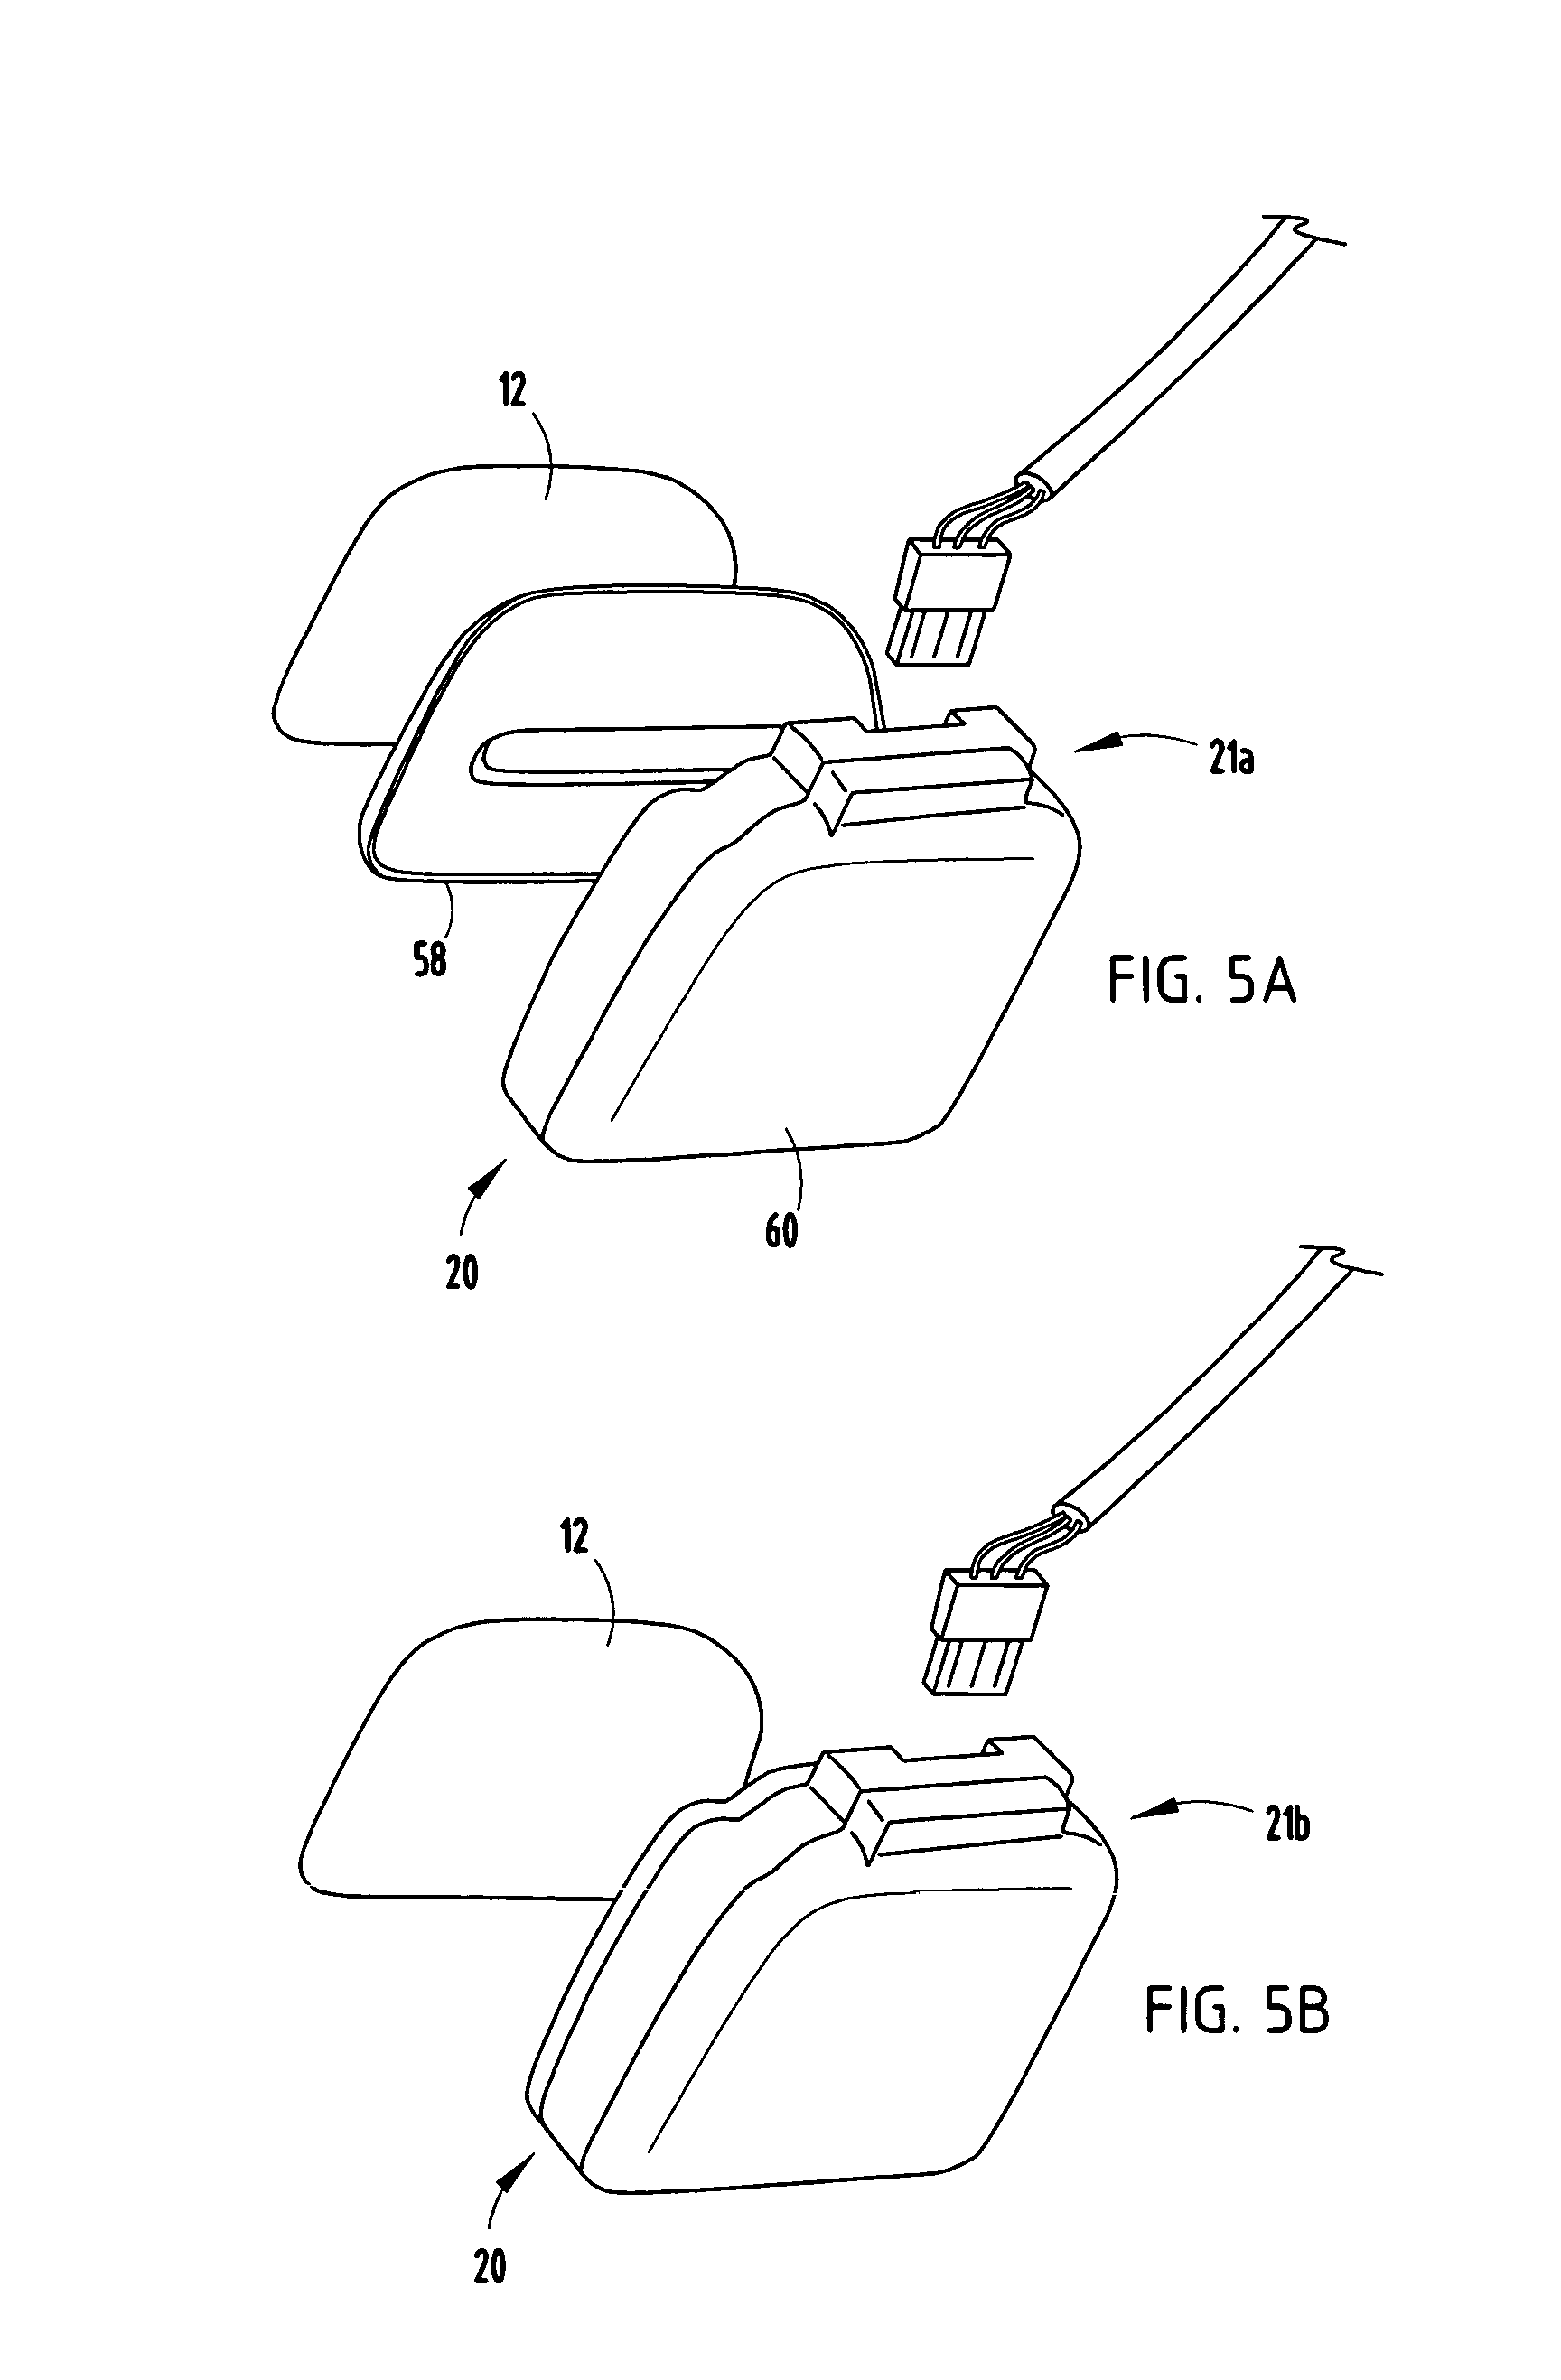 Rearview mirror system for accommodating a rain sensor